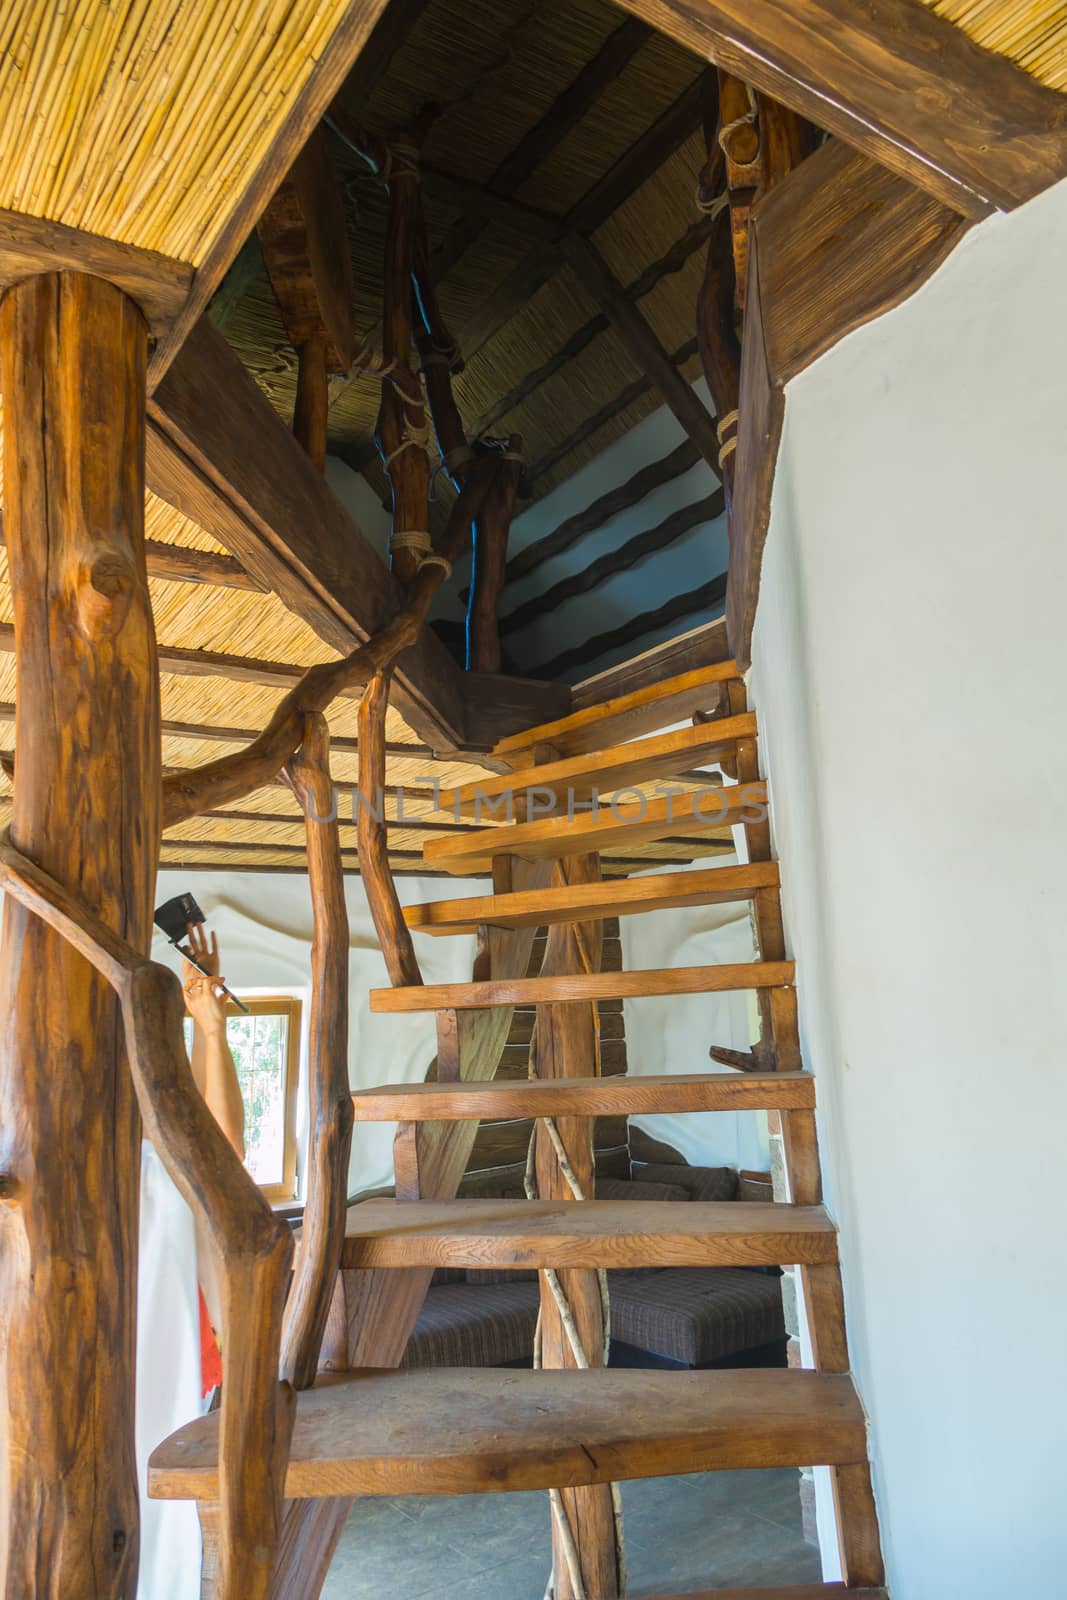 near the white wall stylized decorative unusual wooden staircase with handrails from branches leads to the second floor under a roof covered with straw